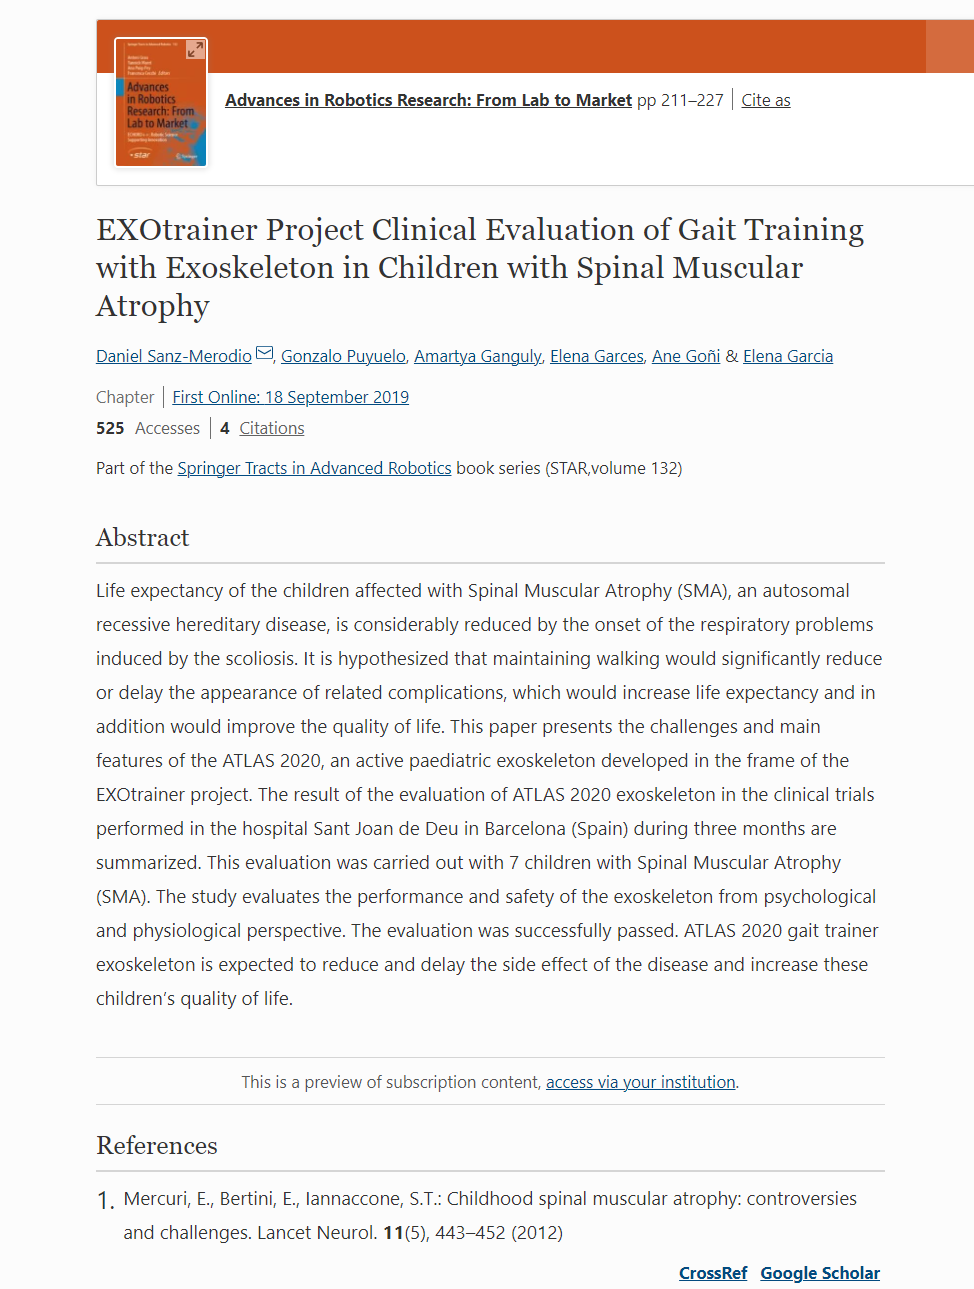 EXOtrainer Project Clinical Evaluation of Gait Training with Exoskeleton in Children with Spinal Muscular Atrophy